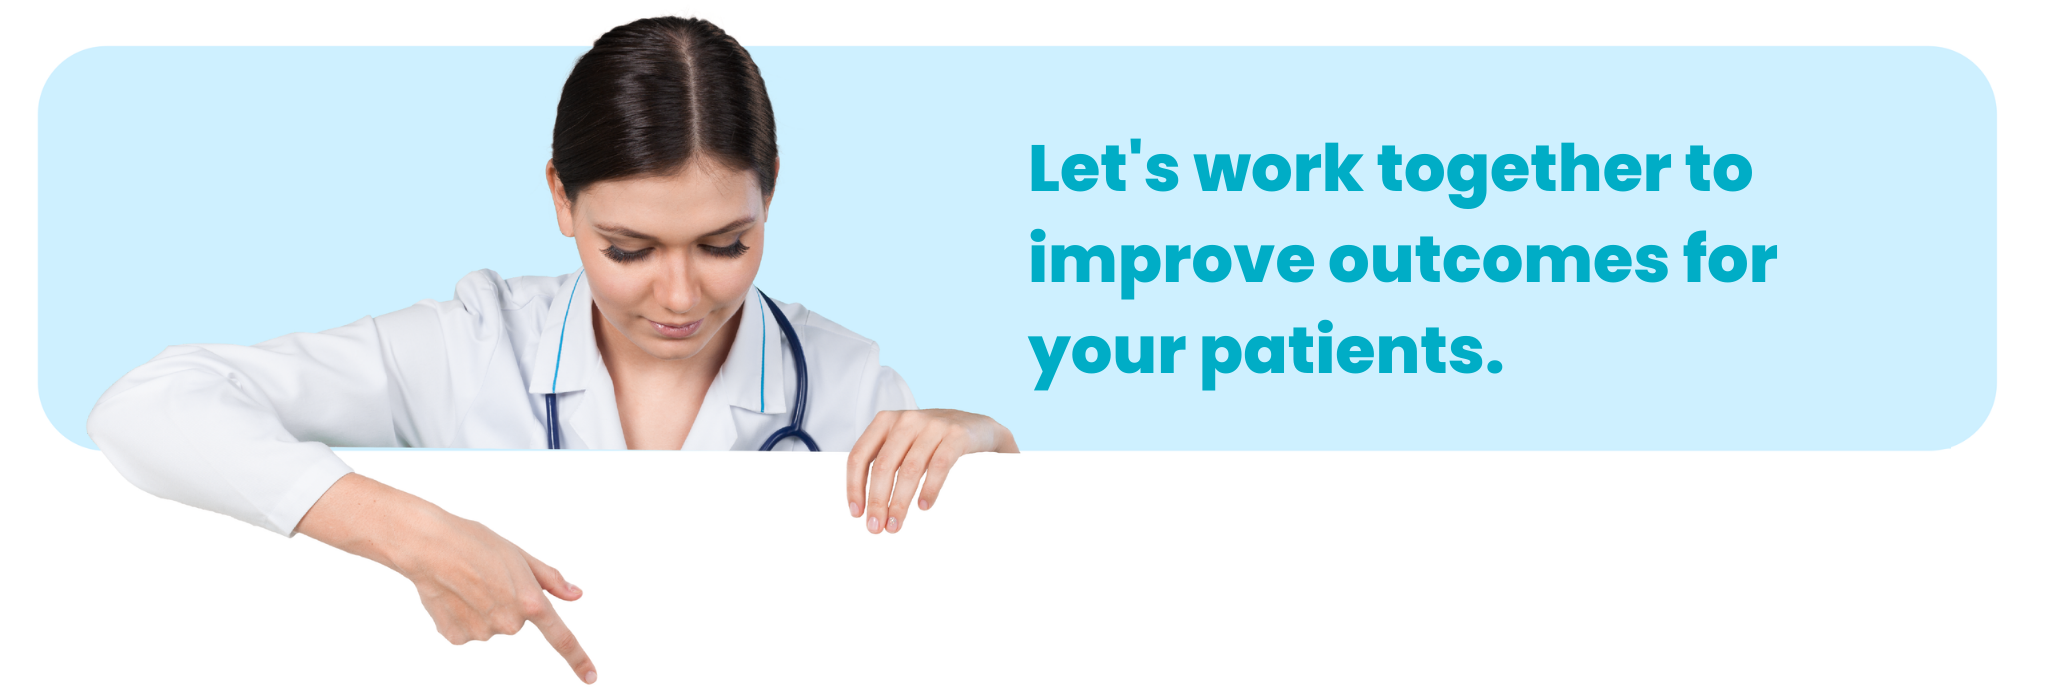 Lets work together to improve outcomes for your patients.